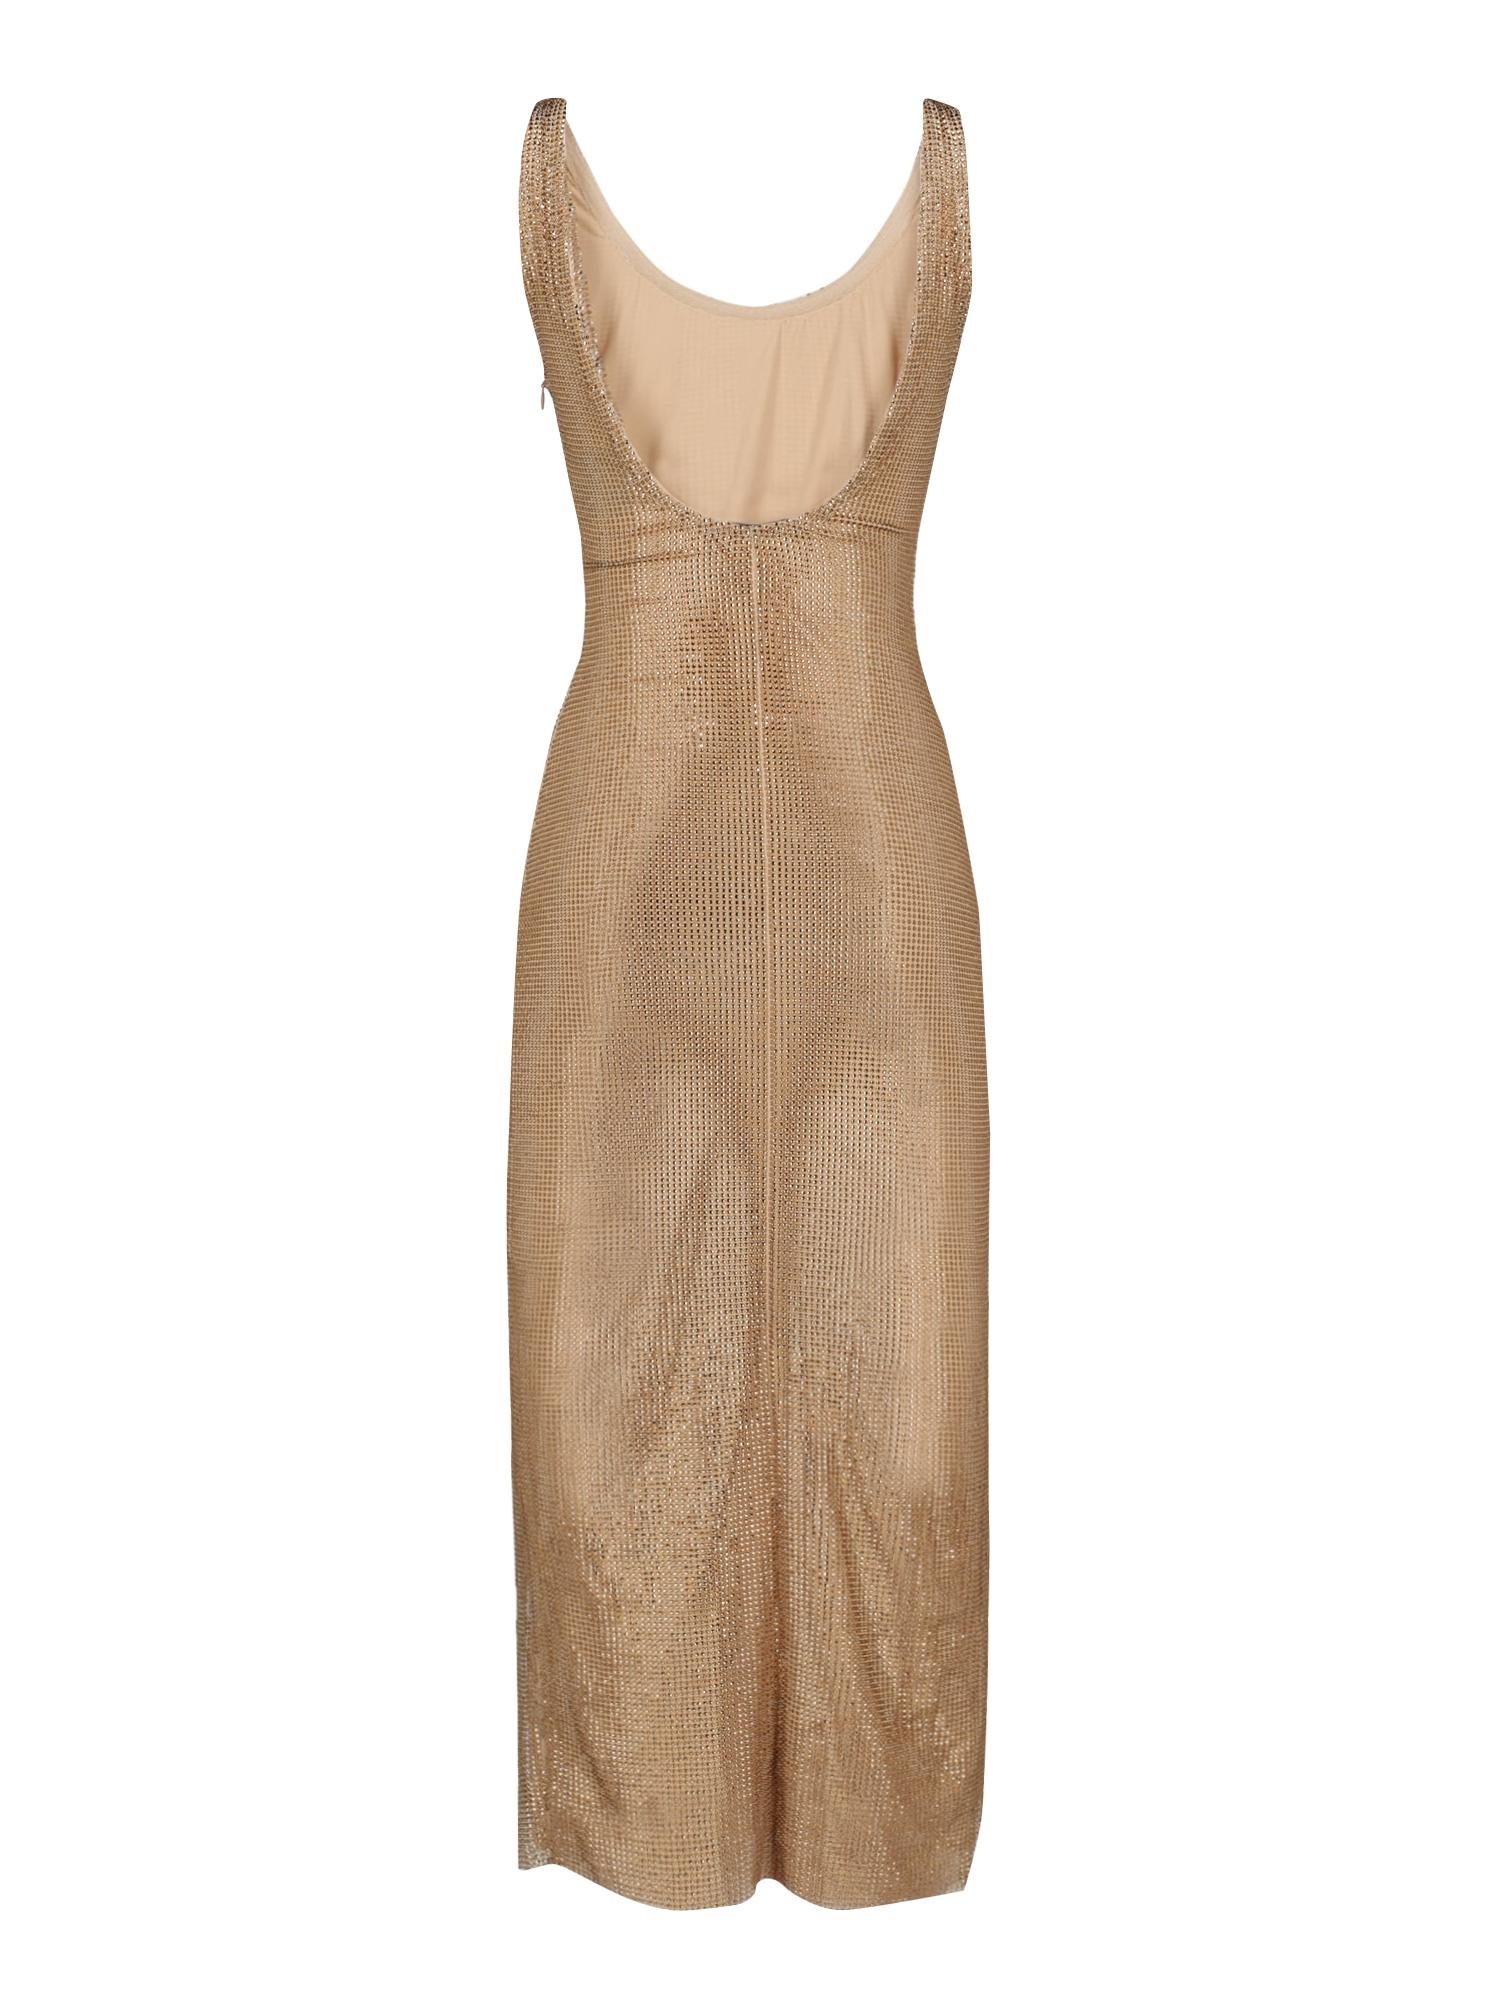 Alessandra Rich Crystal Net Dress
Self: 62% poly, 38% polyurethane
Detail: 100% glass.
Hand wash. Fully lined. 
Micro-crystal embellished detail throughout. Hidden side zip closure. Raw cut hem.
Sleeveless, side zipper fastening
Total length: 125